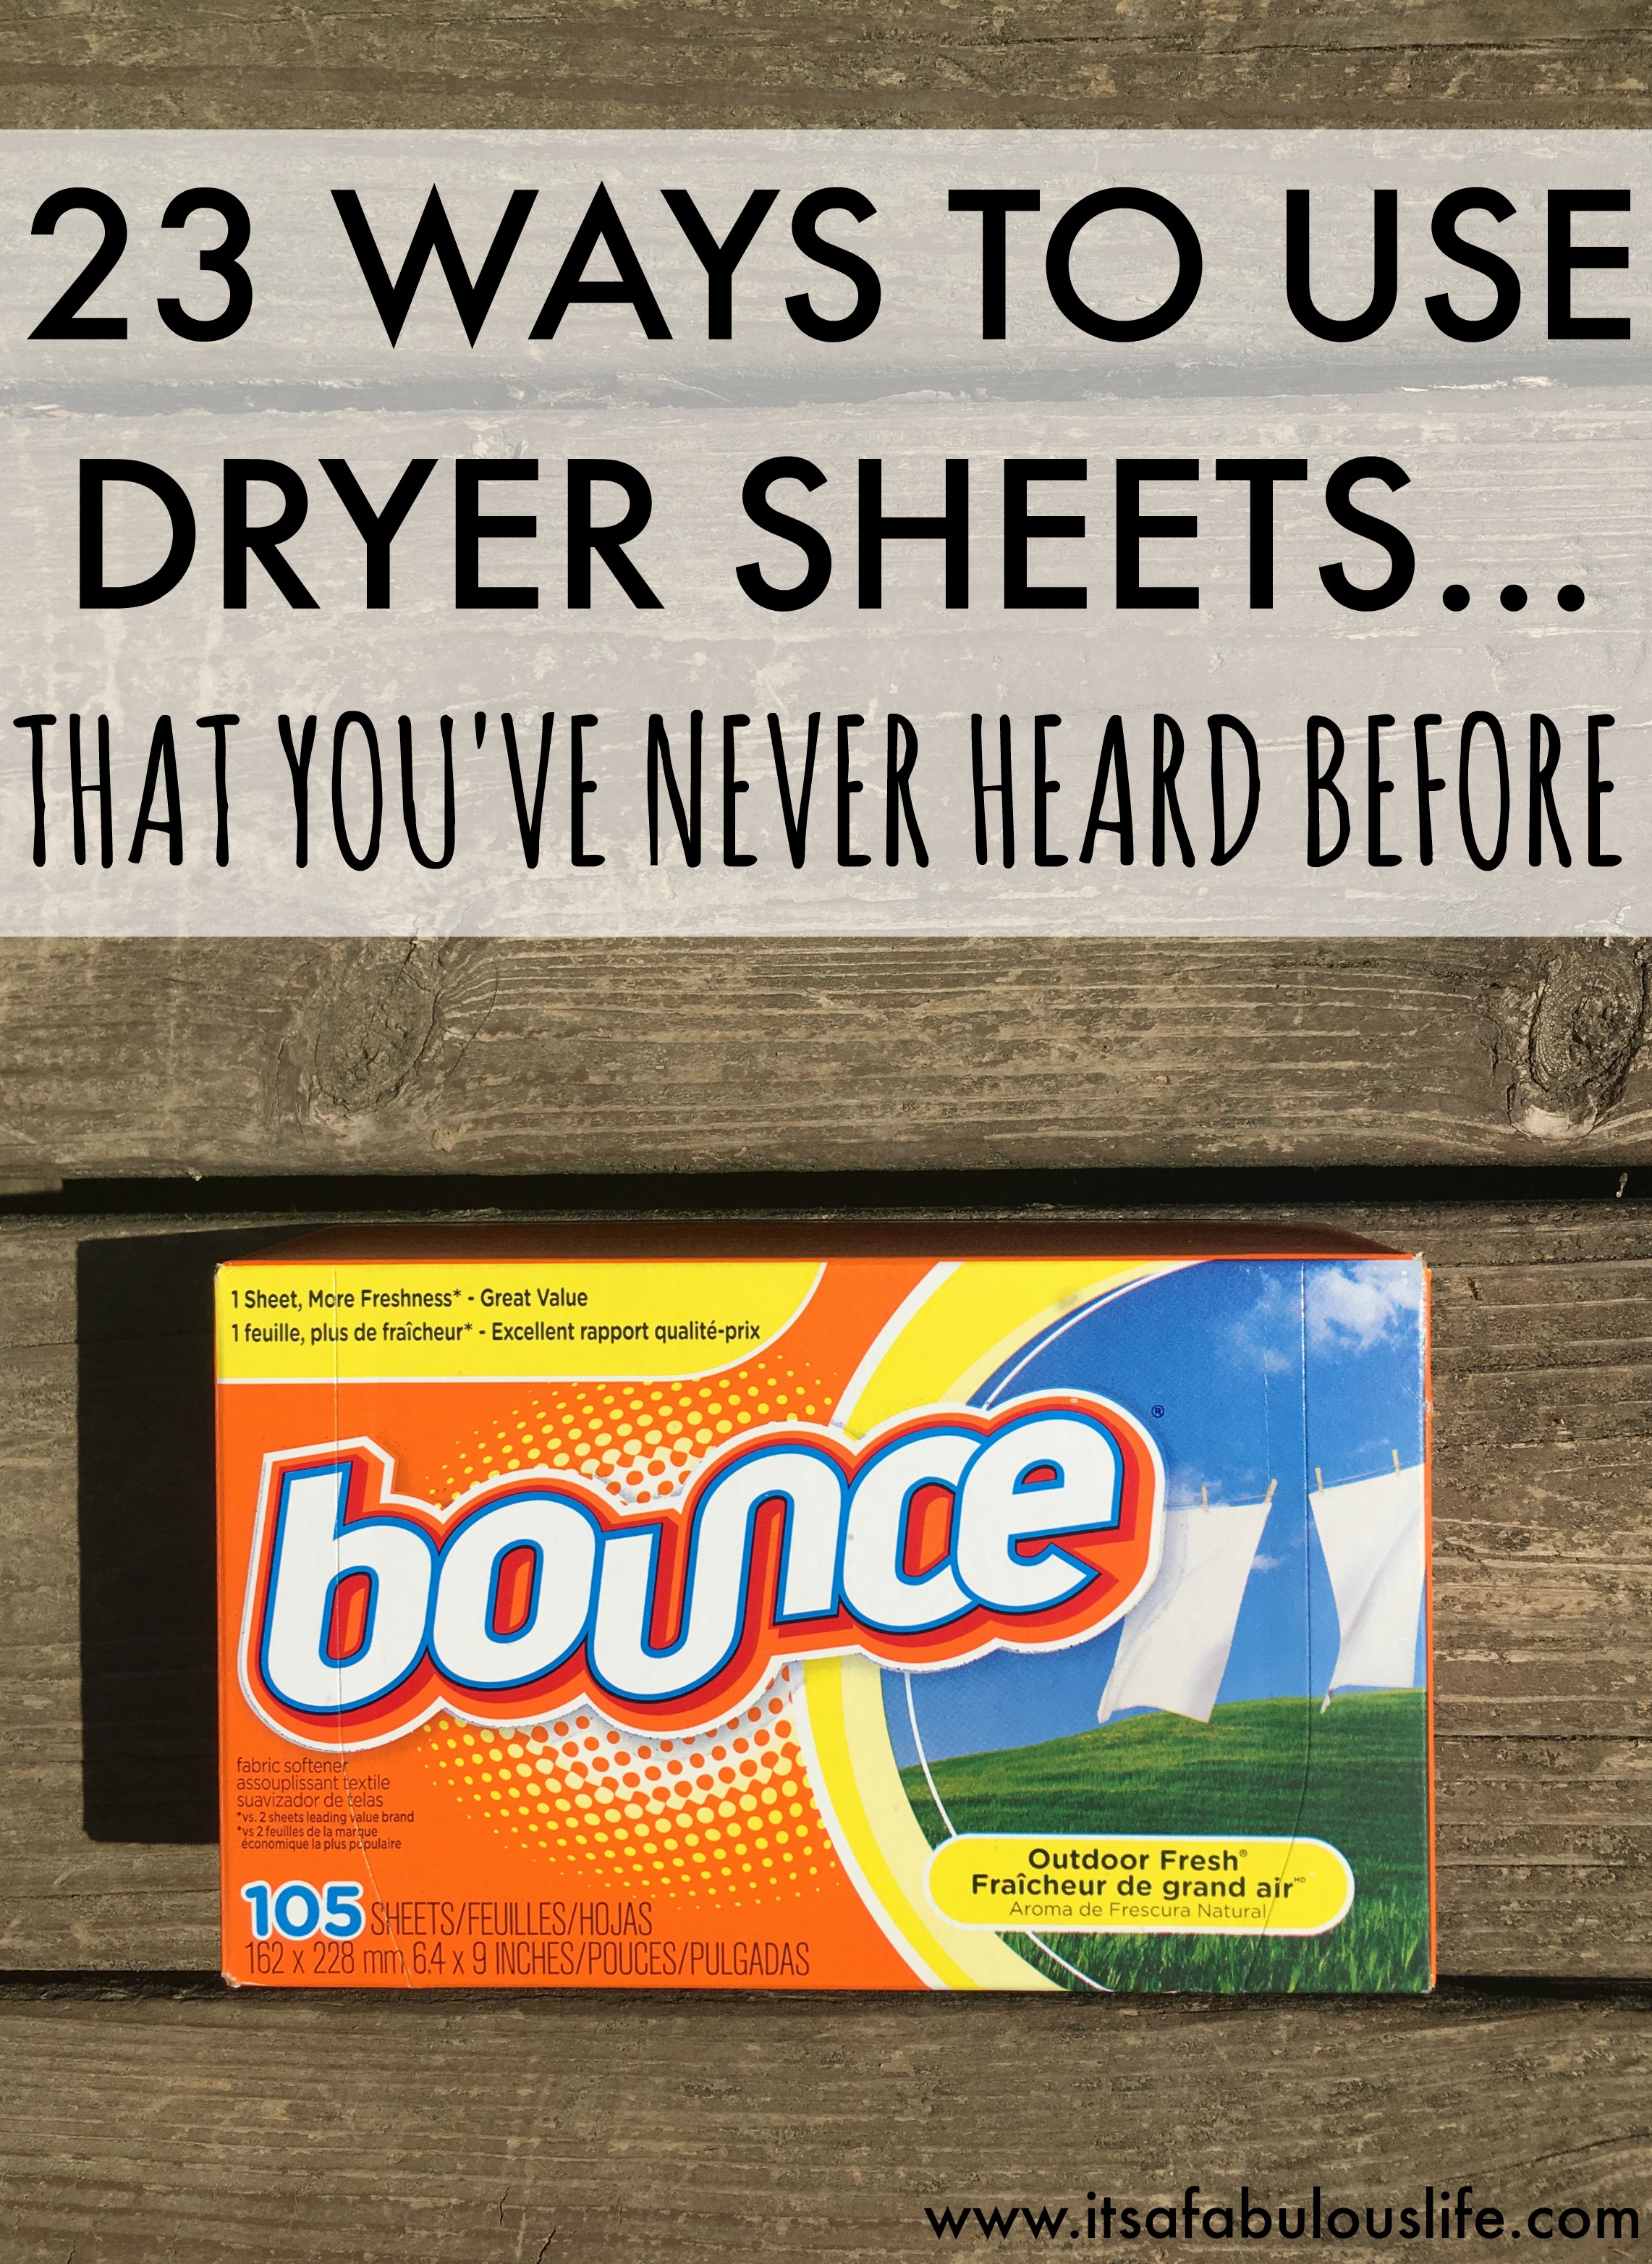 23 ways to use dryer sheets